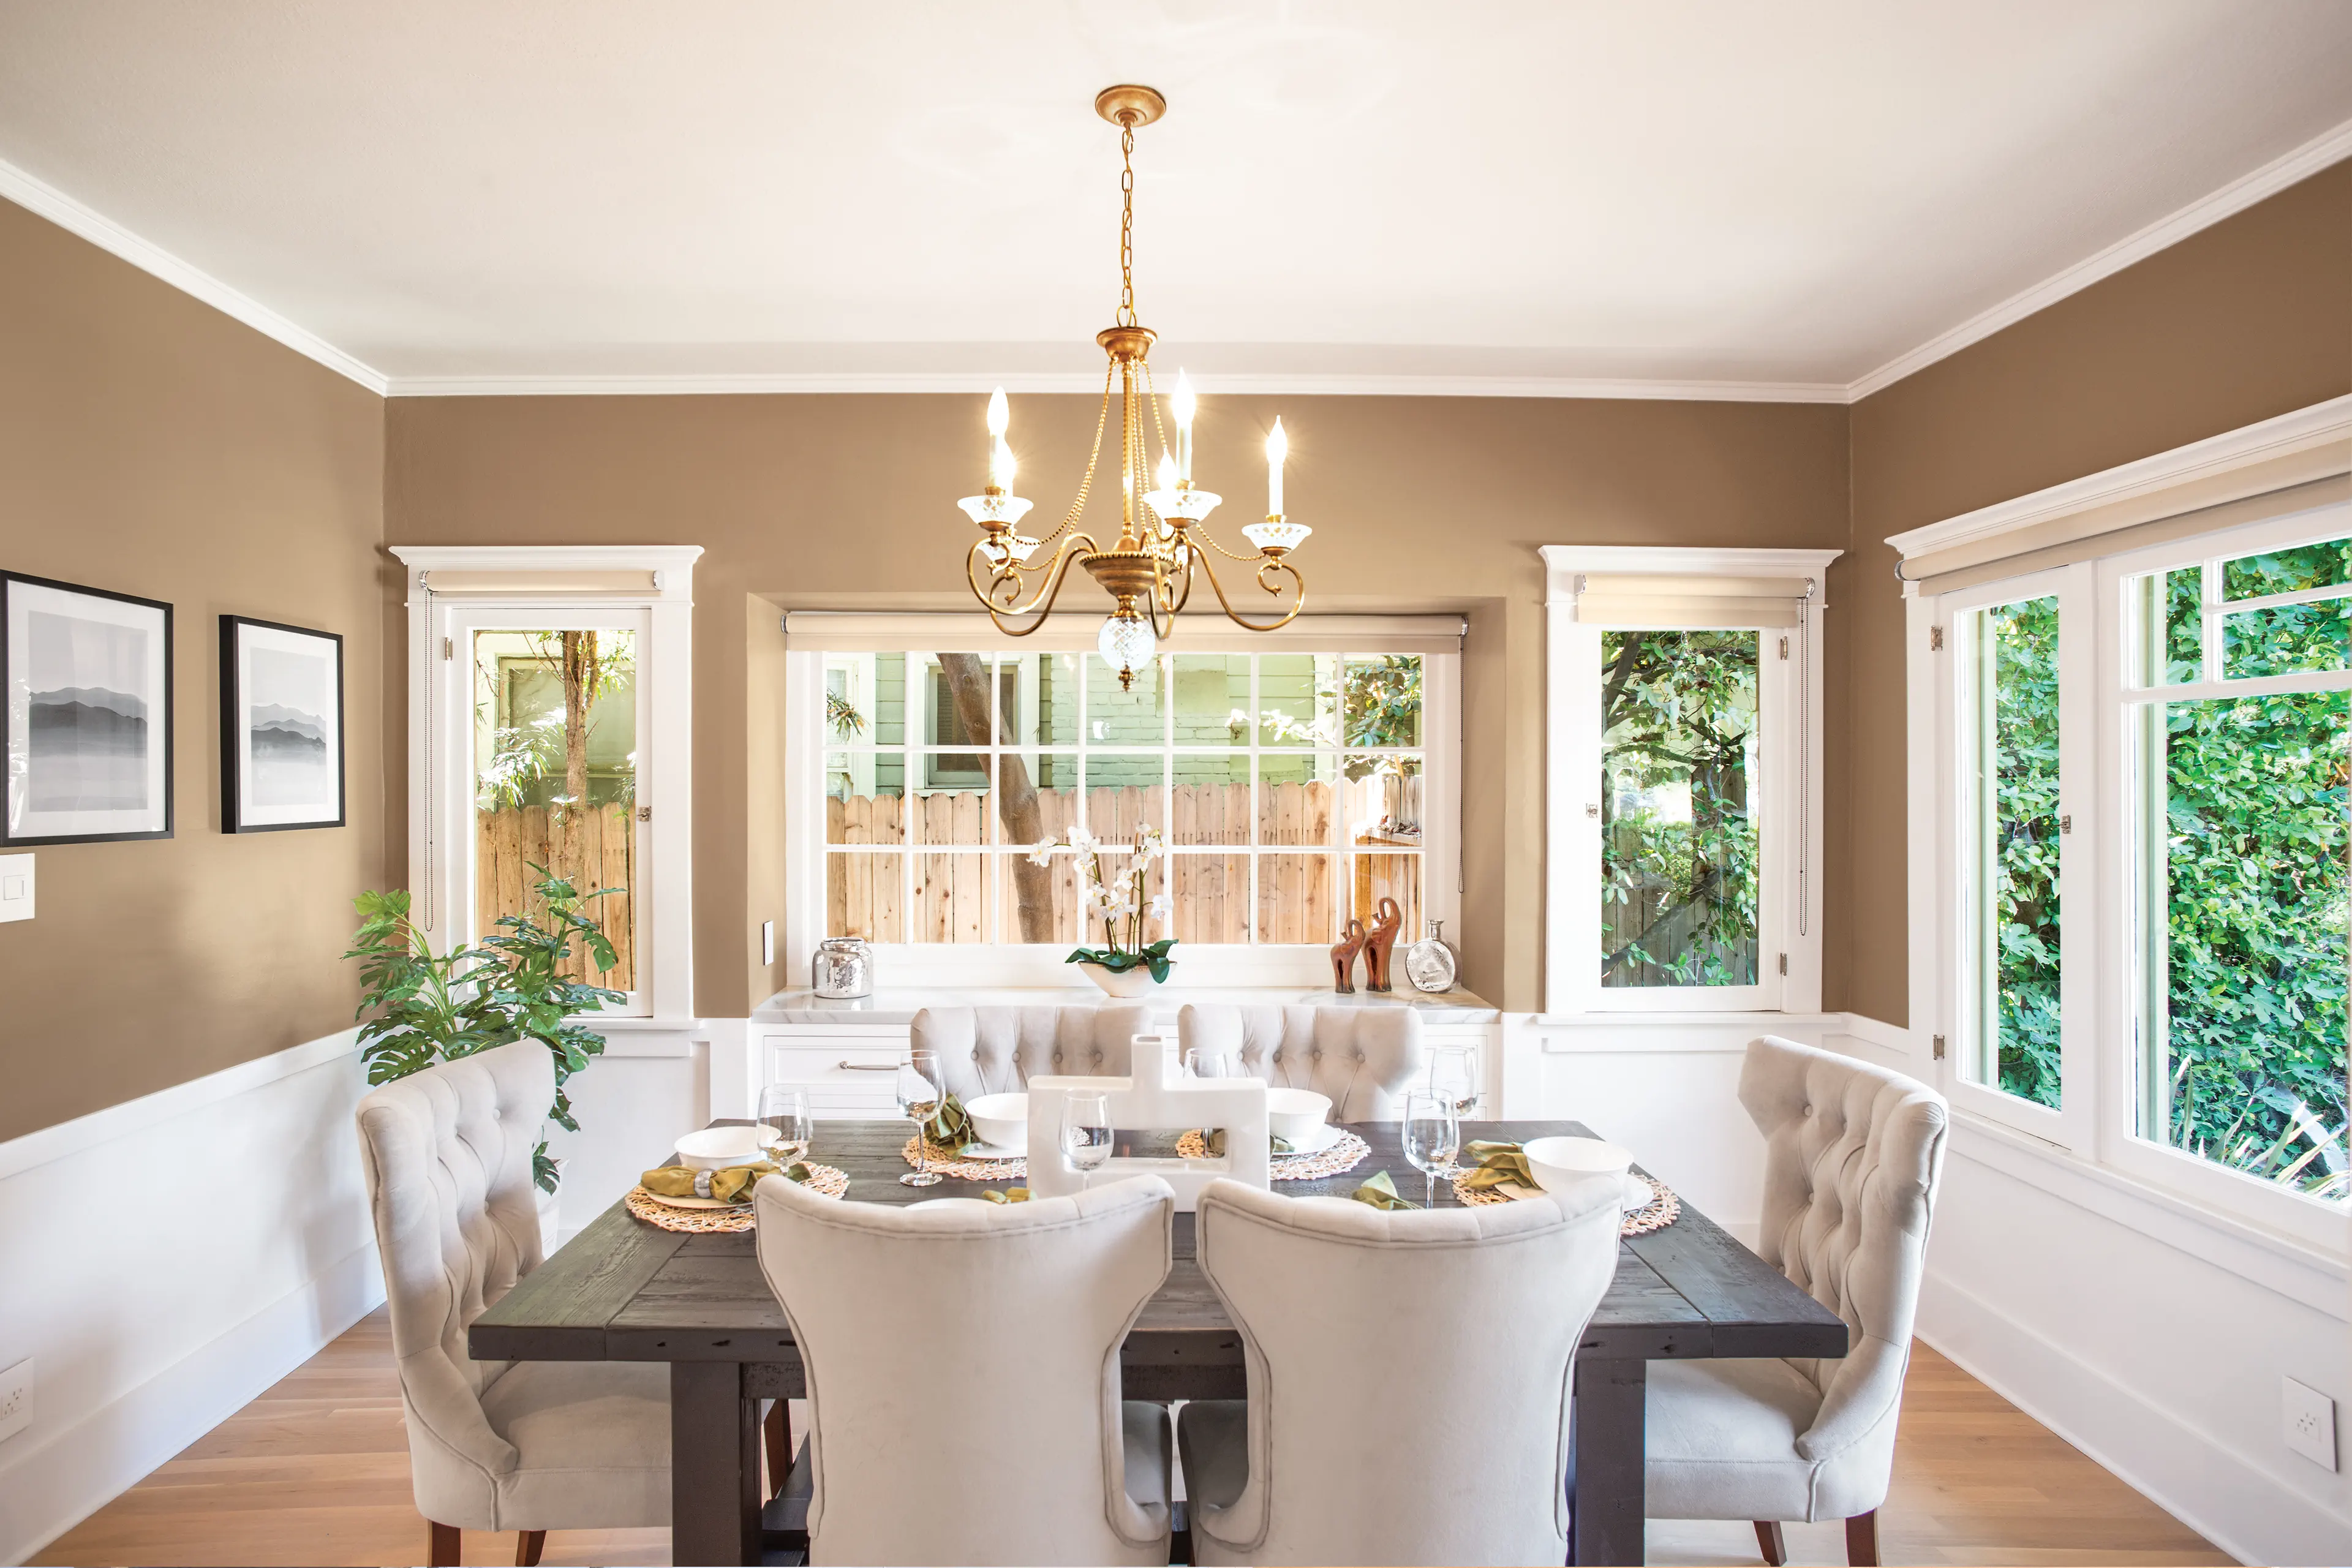 High-quality dining room photograph demonstrating HighSellHomes.com's expertise in color correction and photo editing